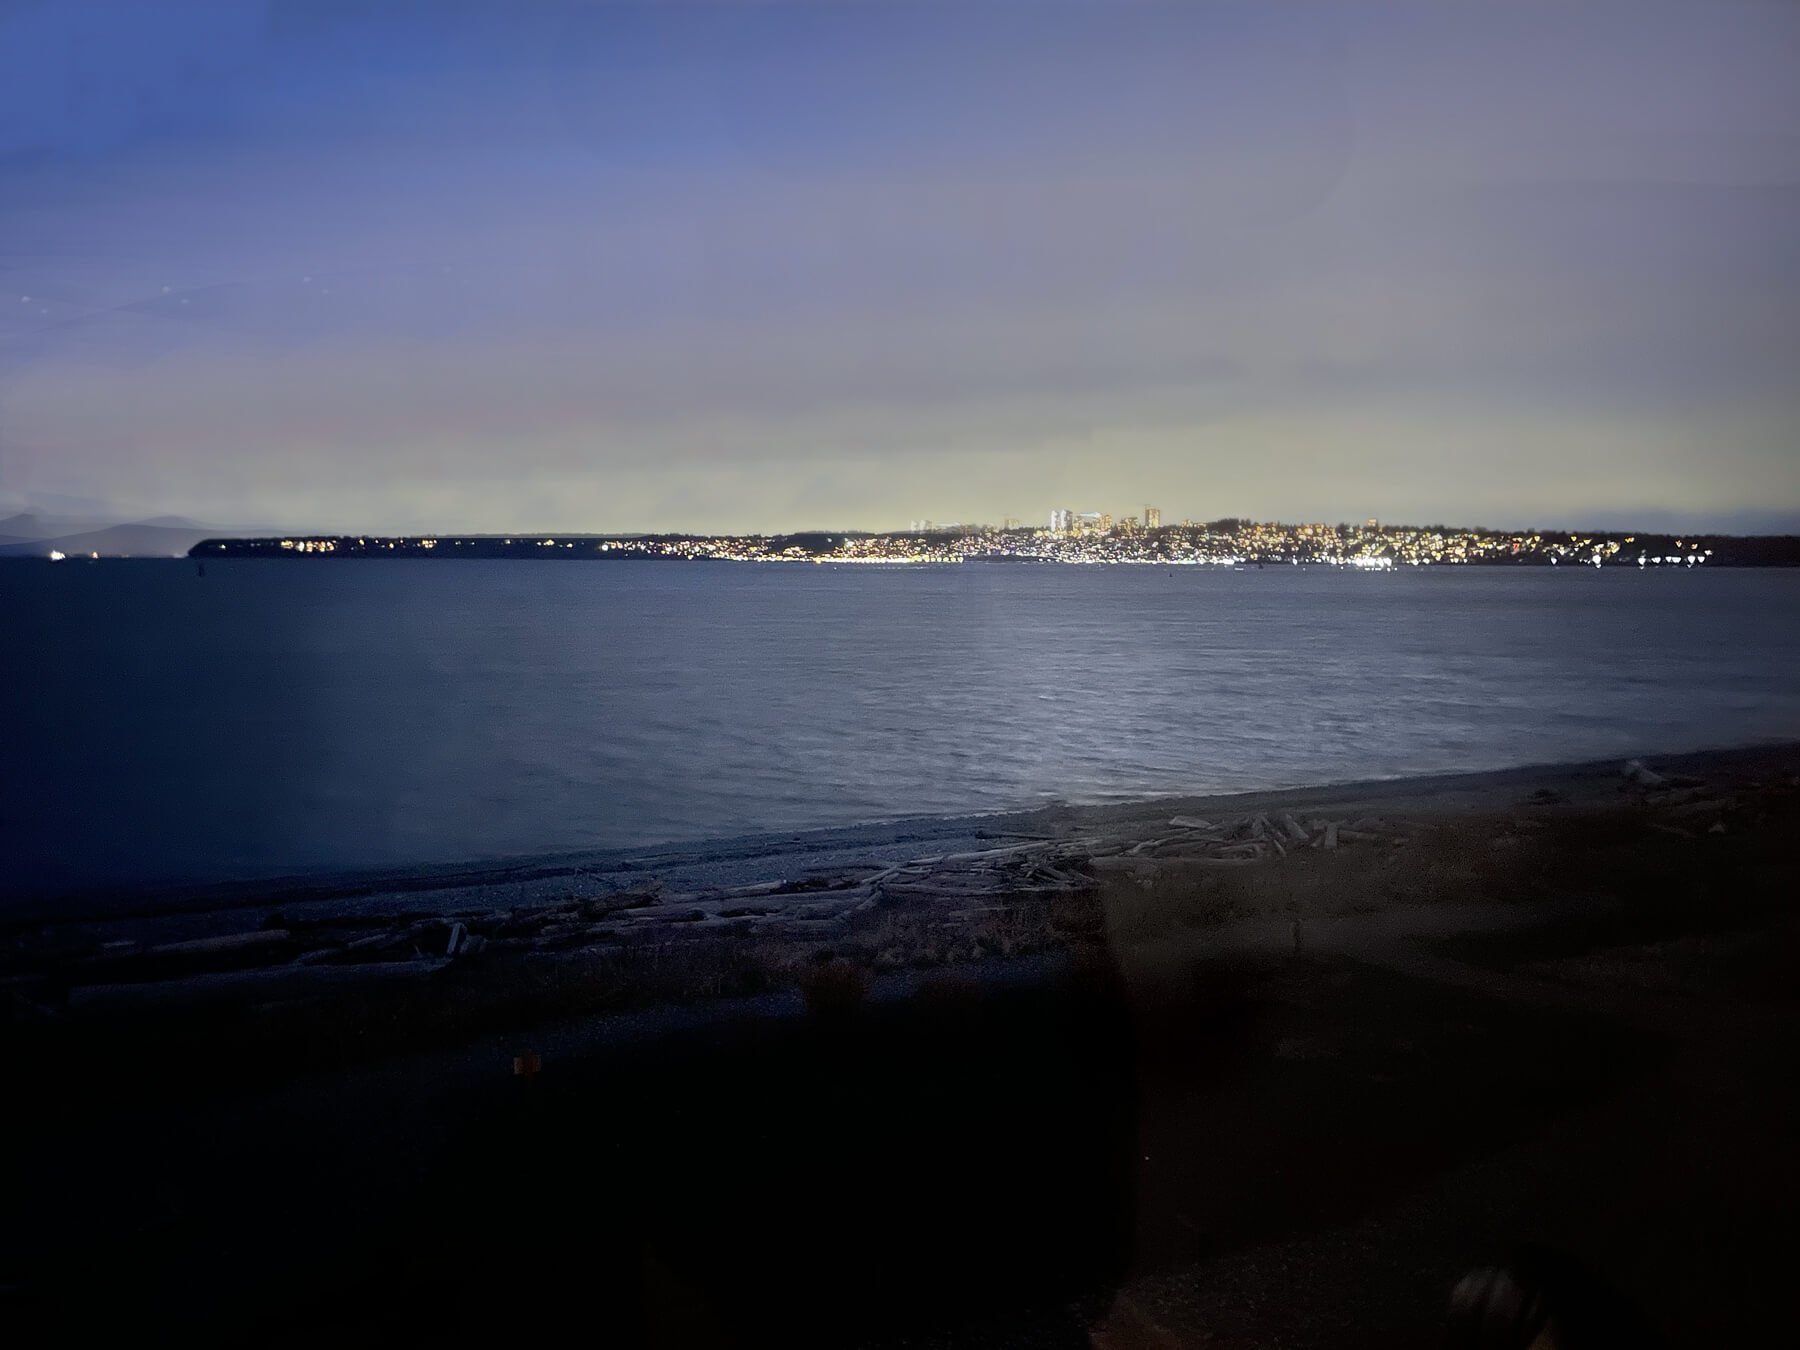 View-of-Semiahmoo-and-White-Rock-at-night-from-the-beach-on-Semiahmoo